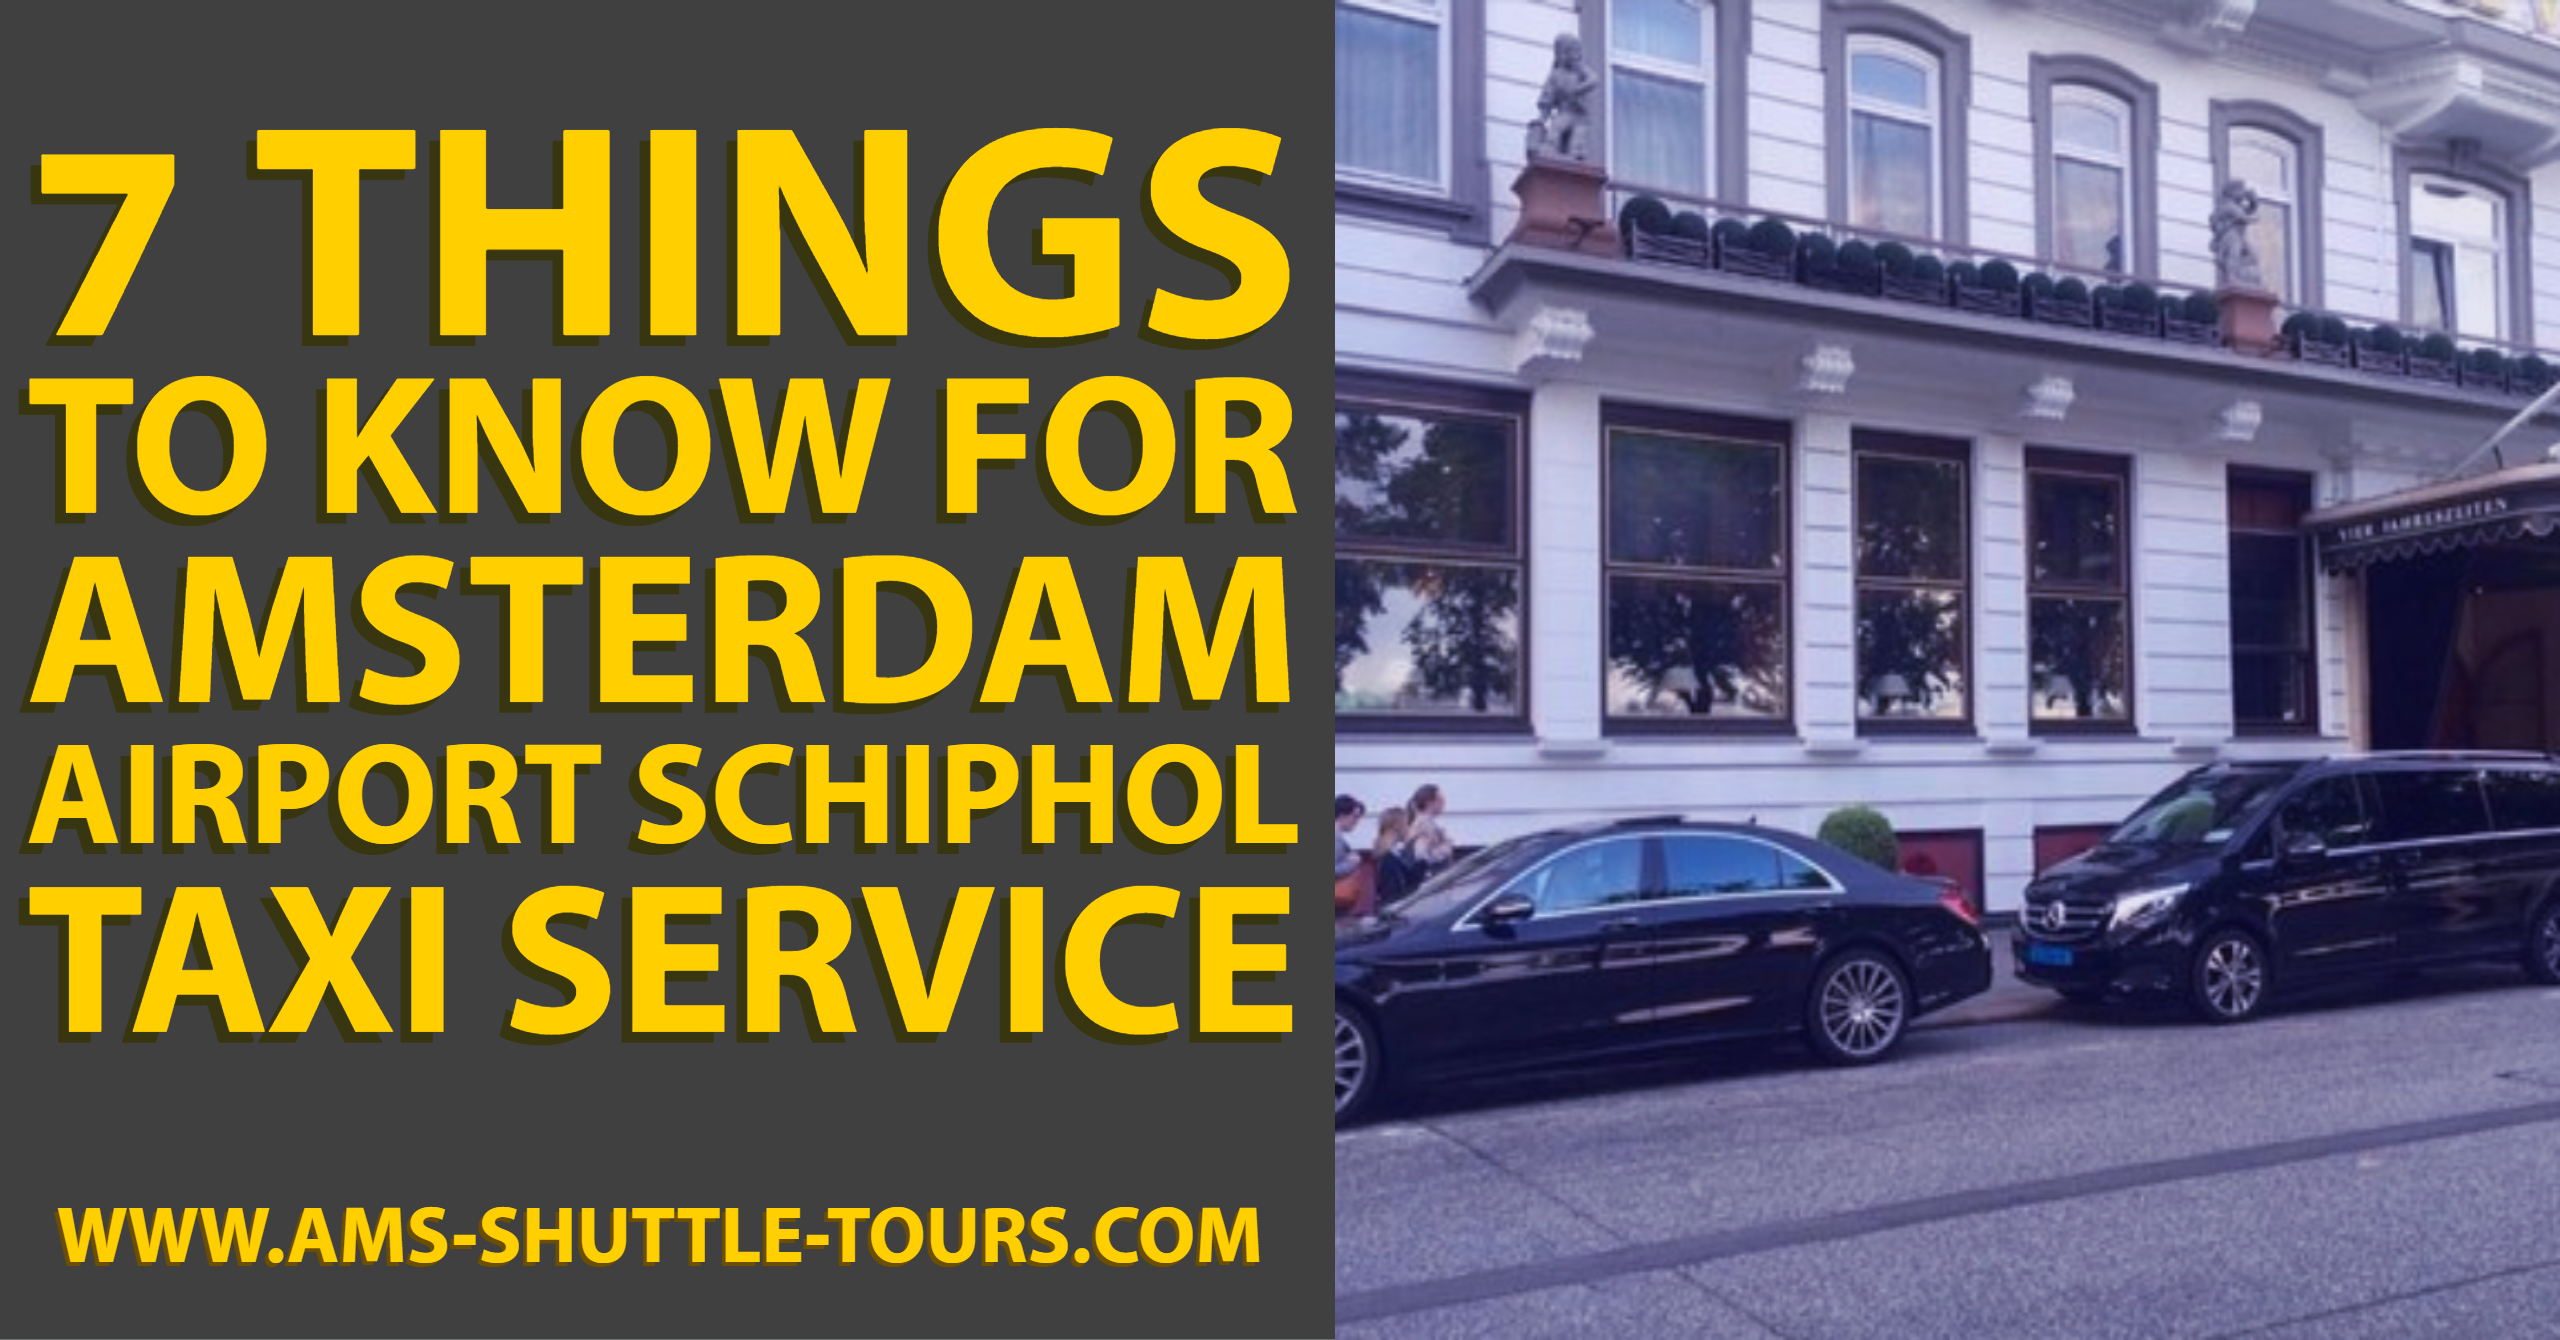 how much is a cab from amsterdam airport to city center